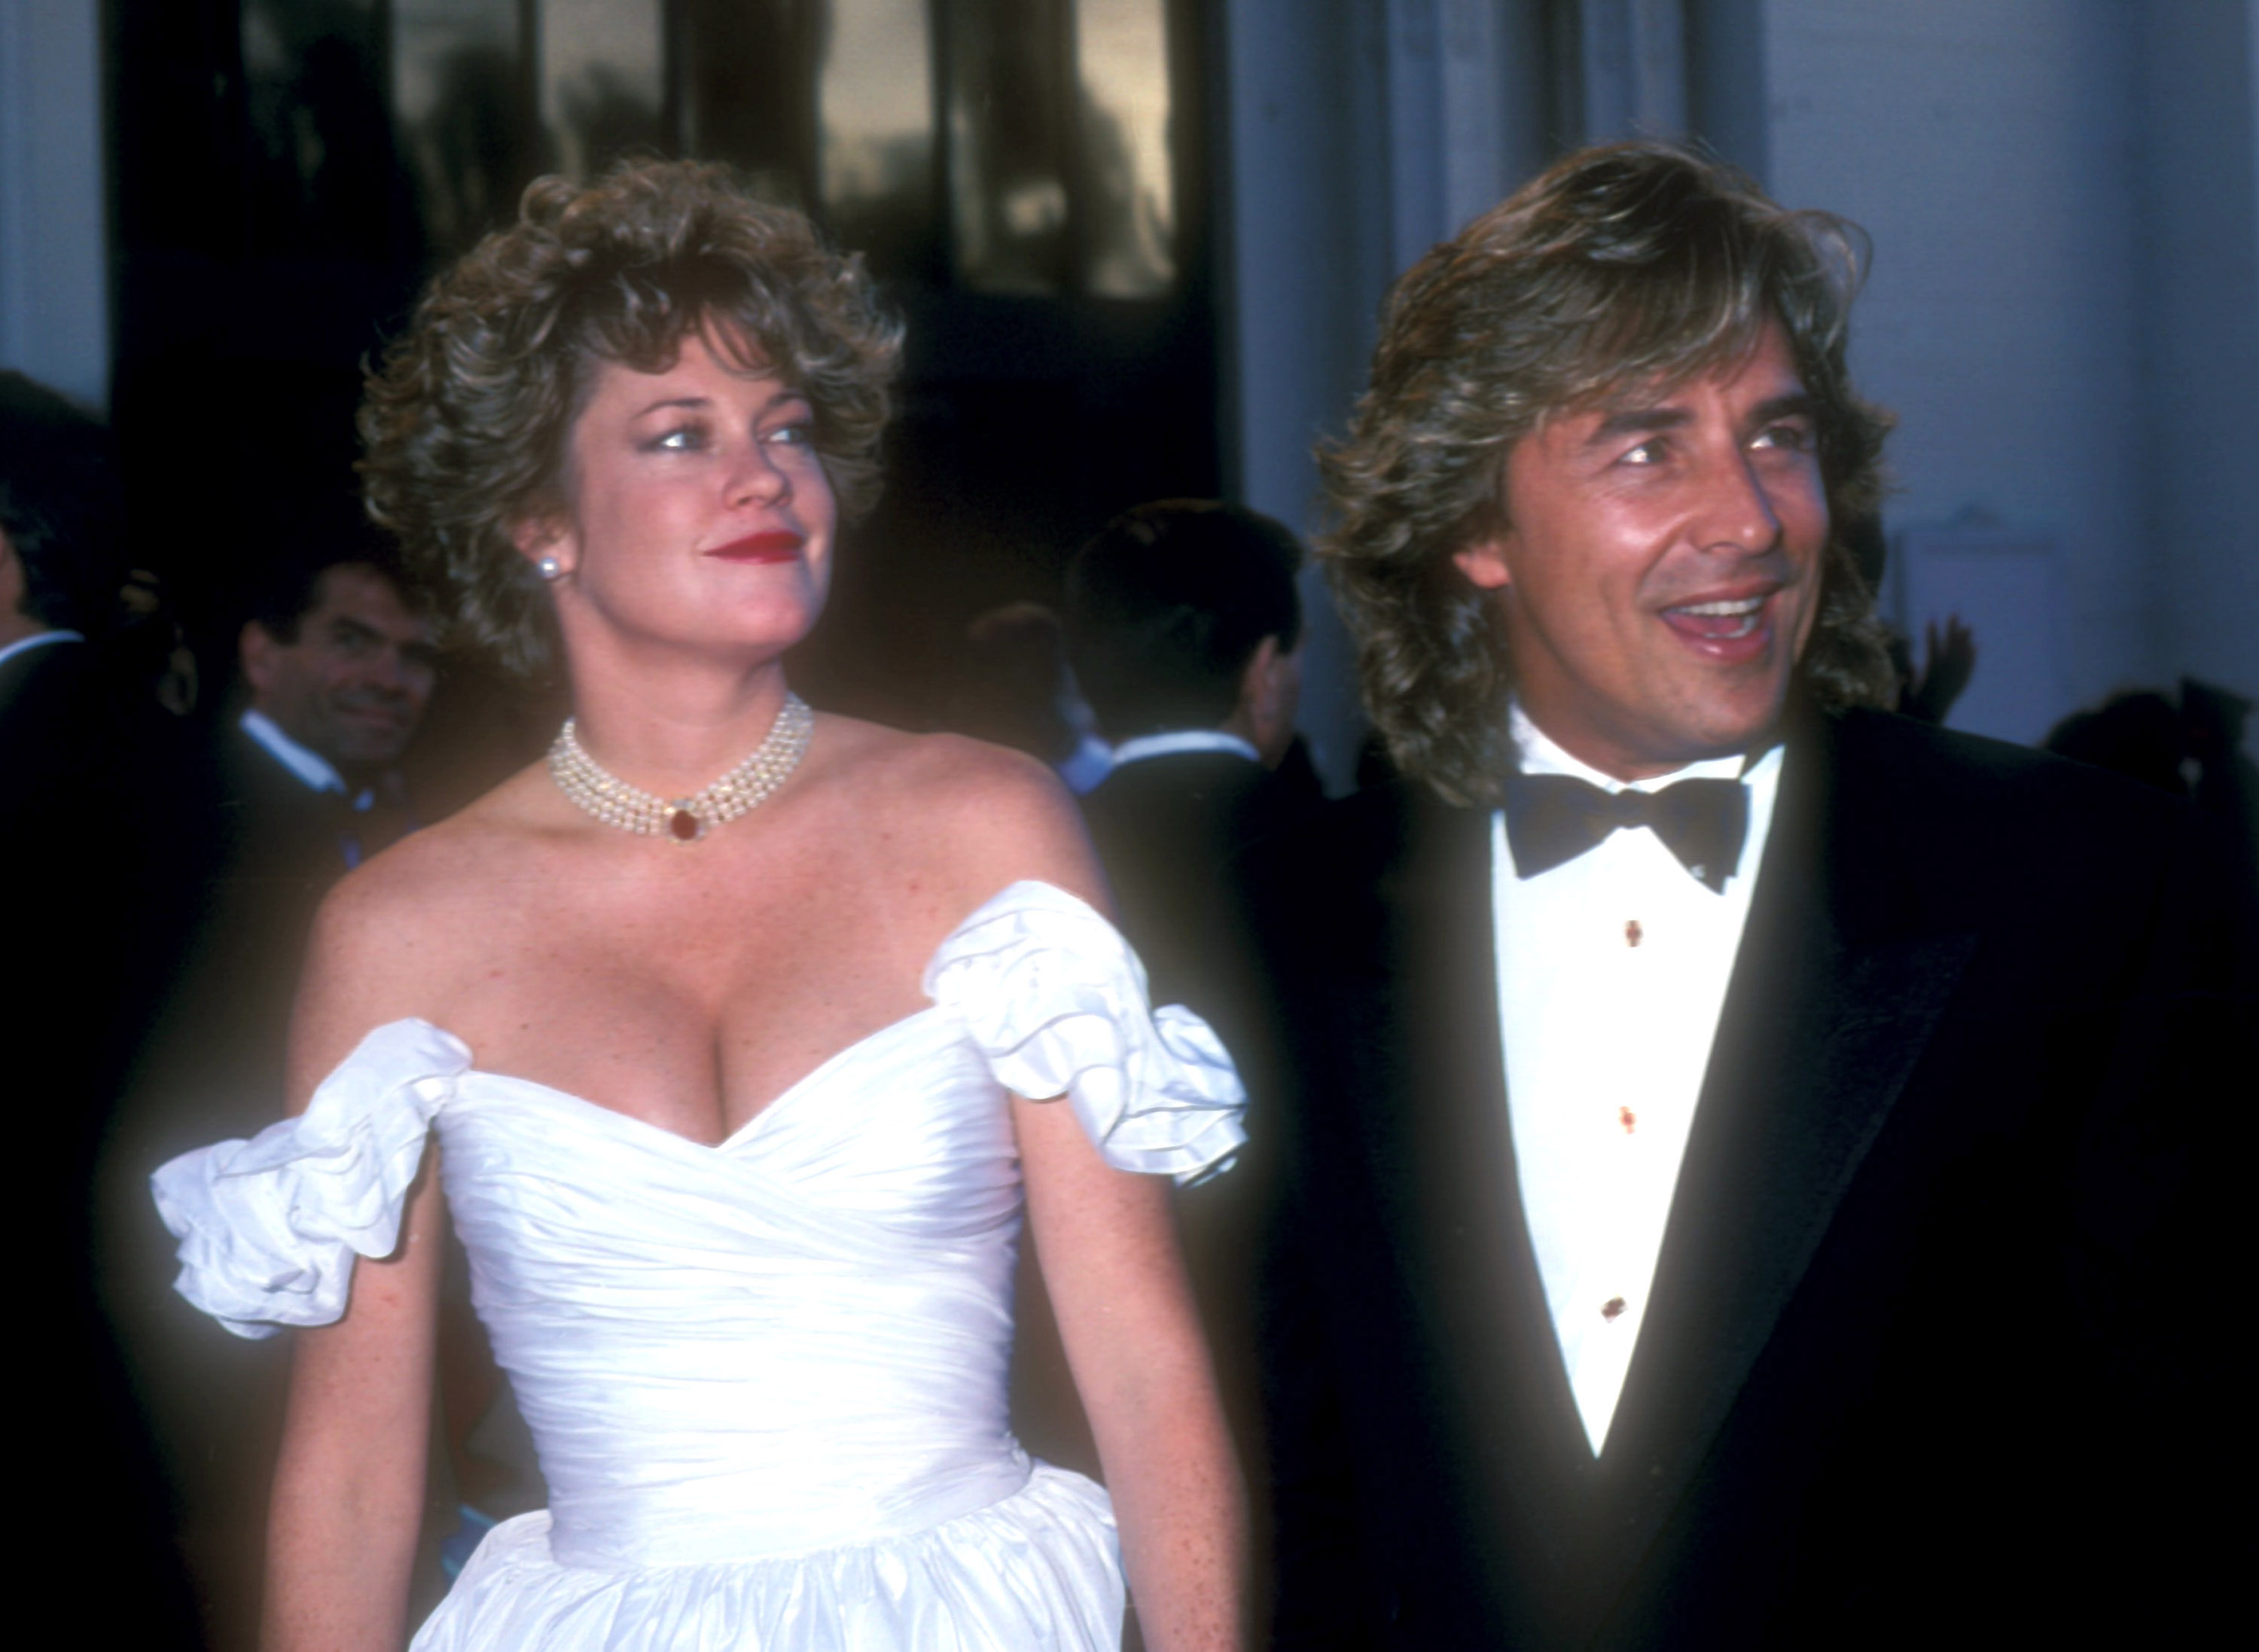 Melanie Griffith and Don Johnson at the 61st Annual Academy Awards on March 29, 1989,  in Los Angeles, California. | Source: Getty Images